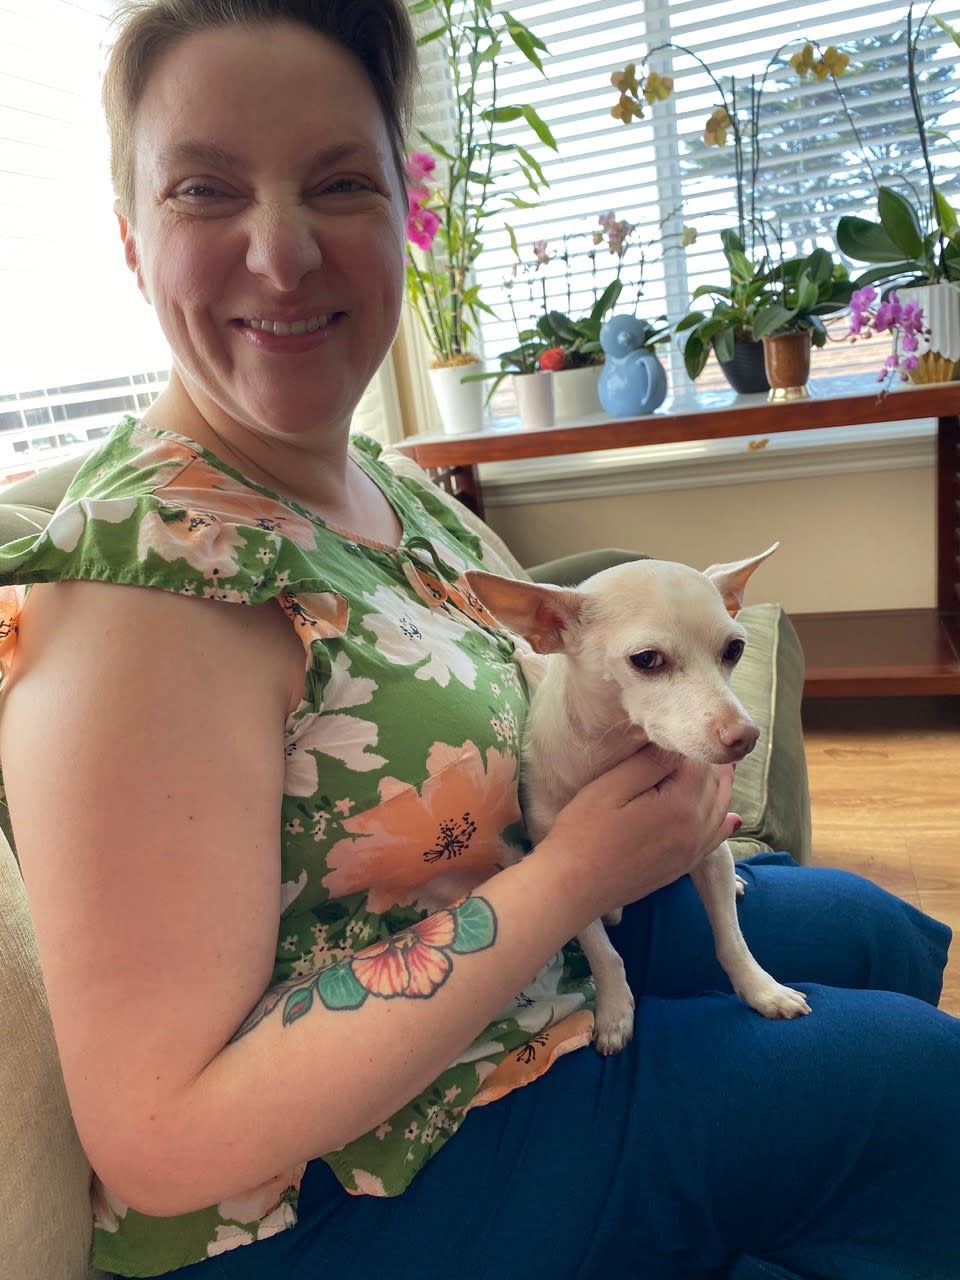 Christine Falletti contacted Muttville to ask if there was a good match for her 100-year-old neighbor, Johanna Carrington, who wanted a dog to love and provide with a caring home. She came to visit Gucci soon after Carrington adopted him. (Courtesy Debbie Carrington)